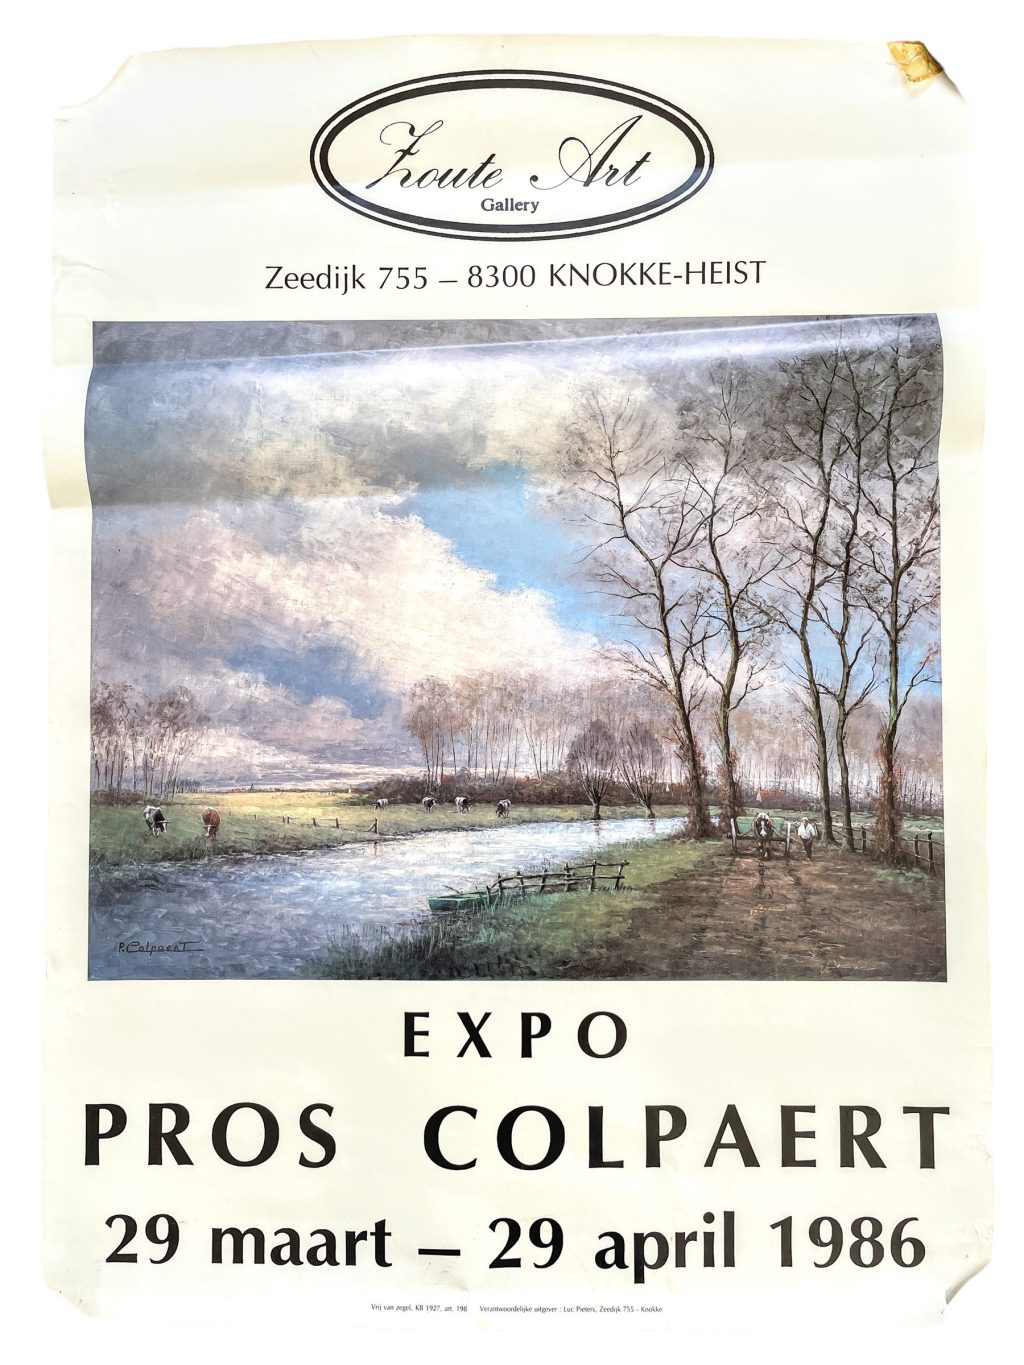 Vintage Dutch Expo Pros Colpaert Frout Art Gallery Original Exhibition Poster Wall Decor Painting Display c1986 / EVE